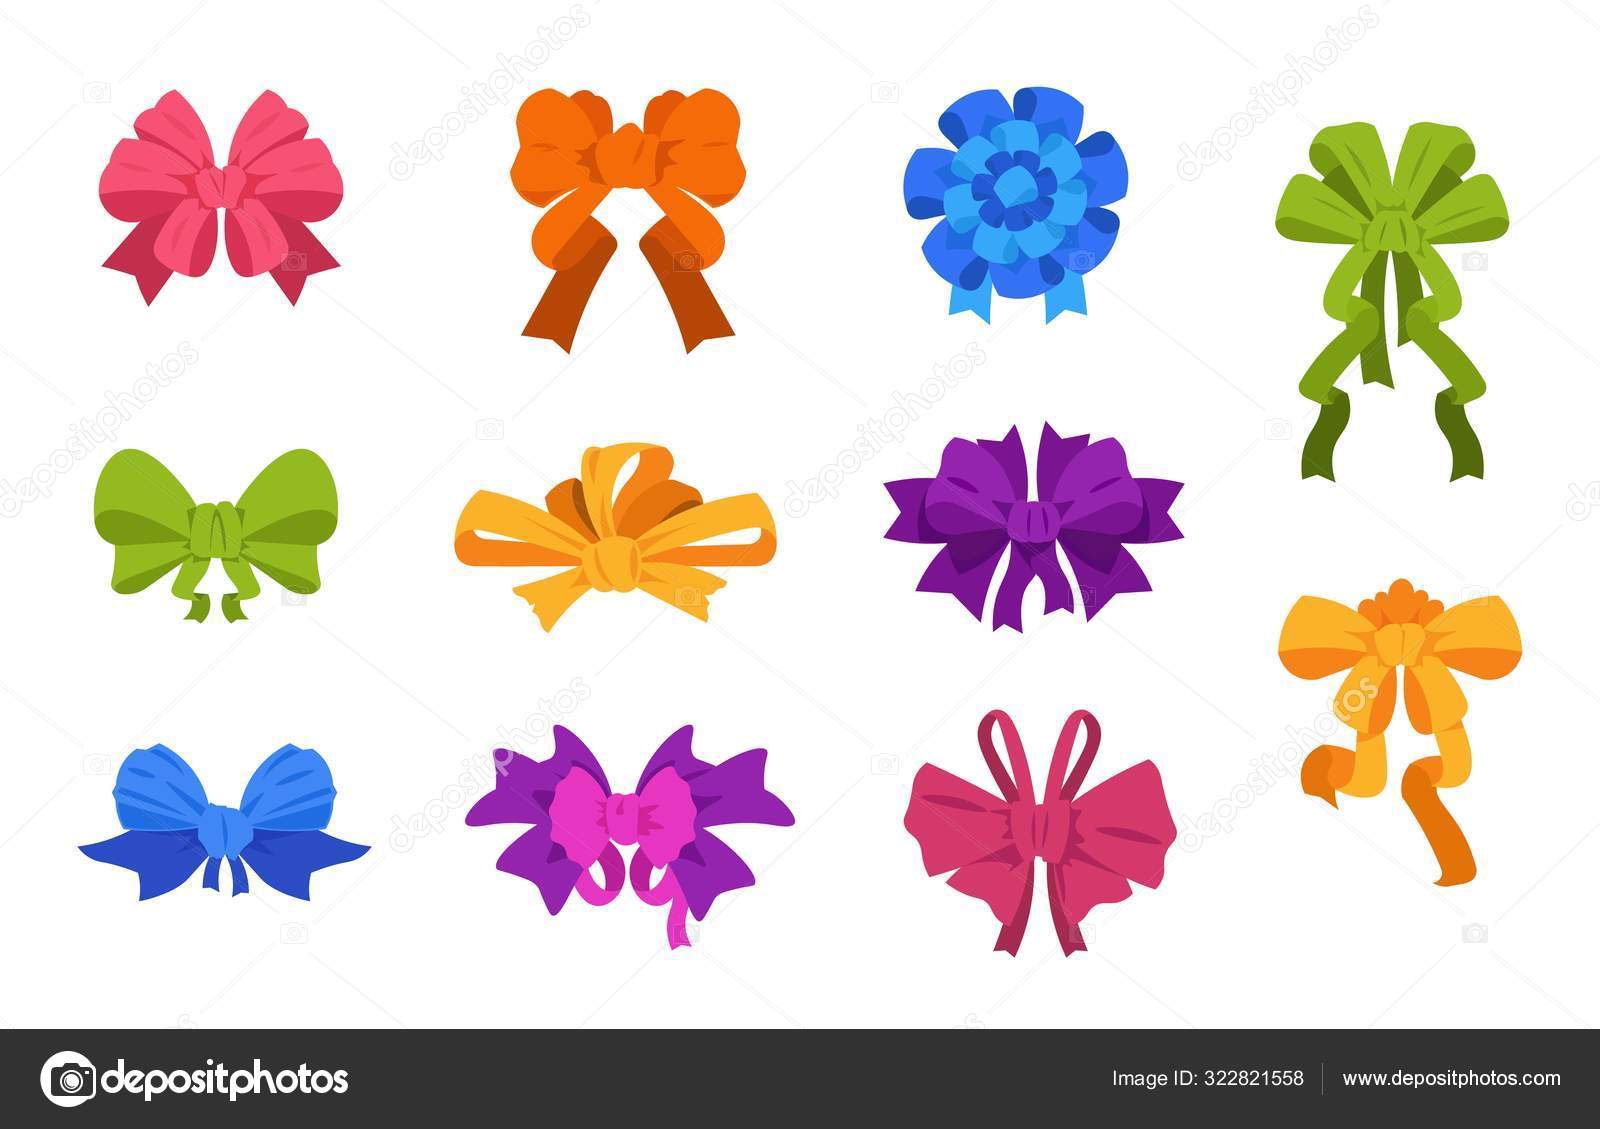 Bow Sticker, Set of Gift Bows with Ribbons, Simple Vector Icon